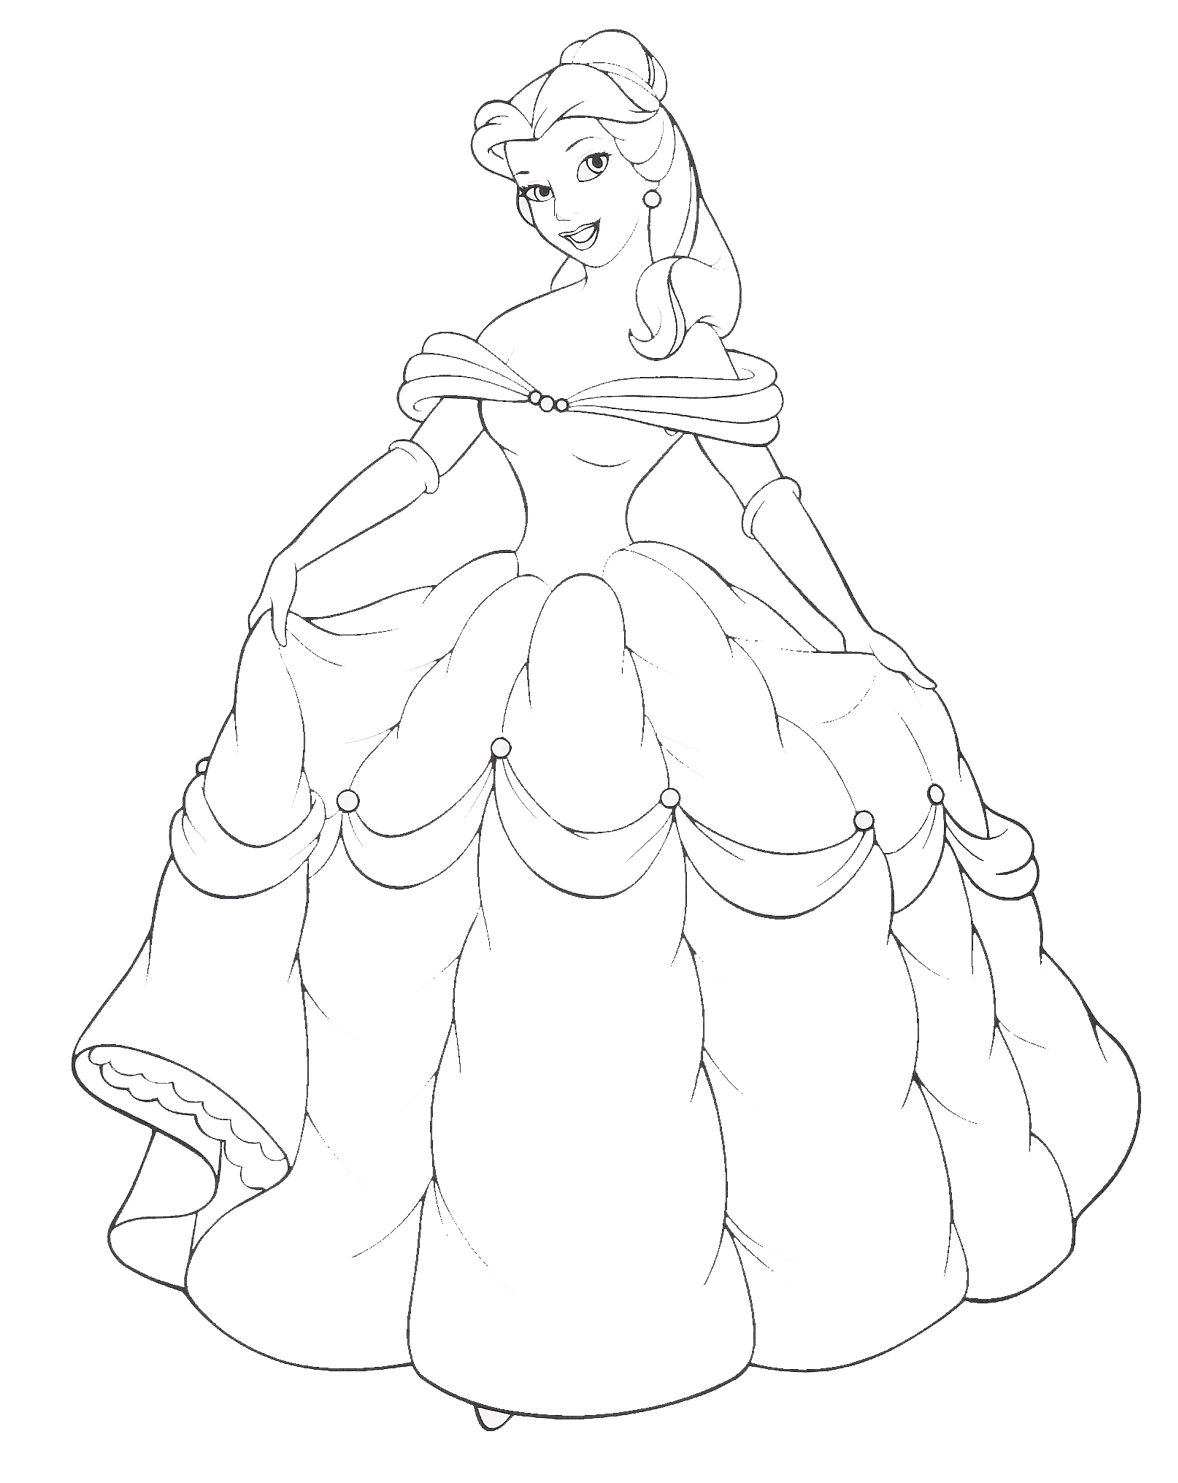 Disney Princess Belle And Her Gown Coloring Sheet BEDECOR Free Coloring Picture wallpaper give a chance to color on the wall without getting in trouble! Fill the walls of your home or office with stress-relieving [bedroomdecorz.blogspot.com]